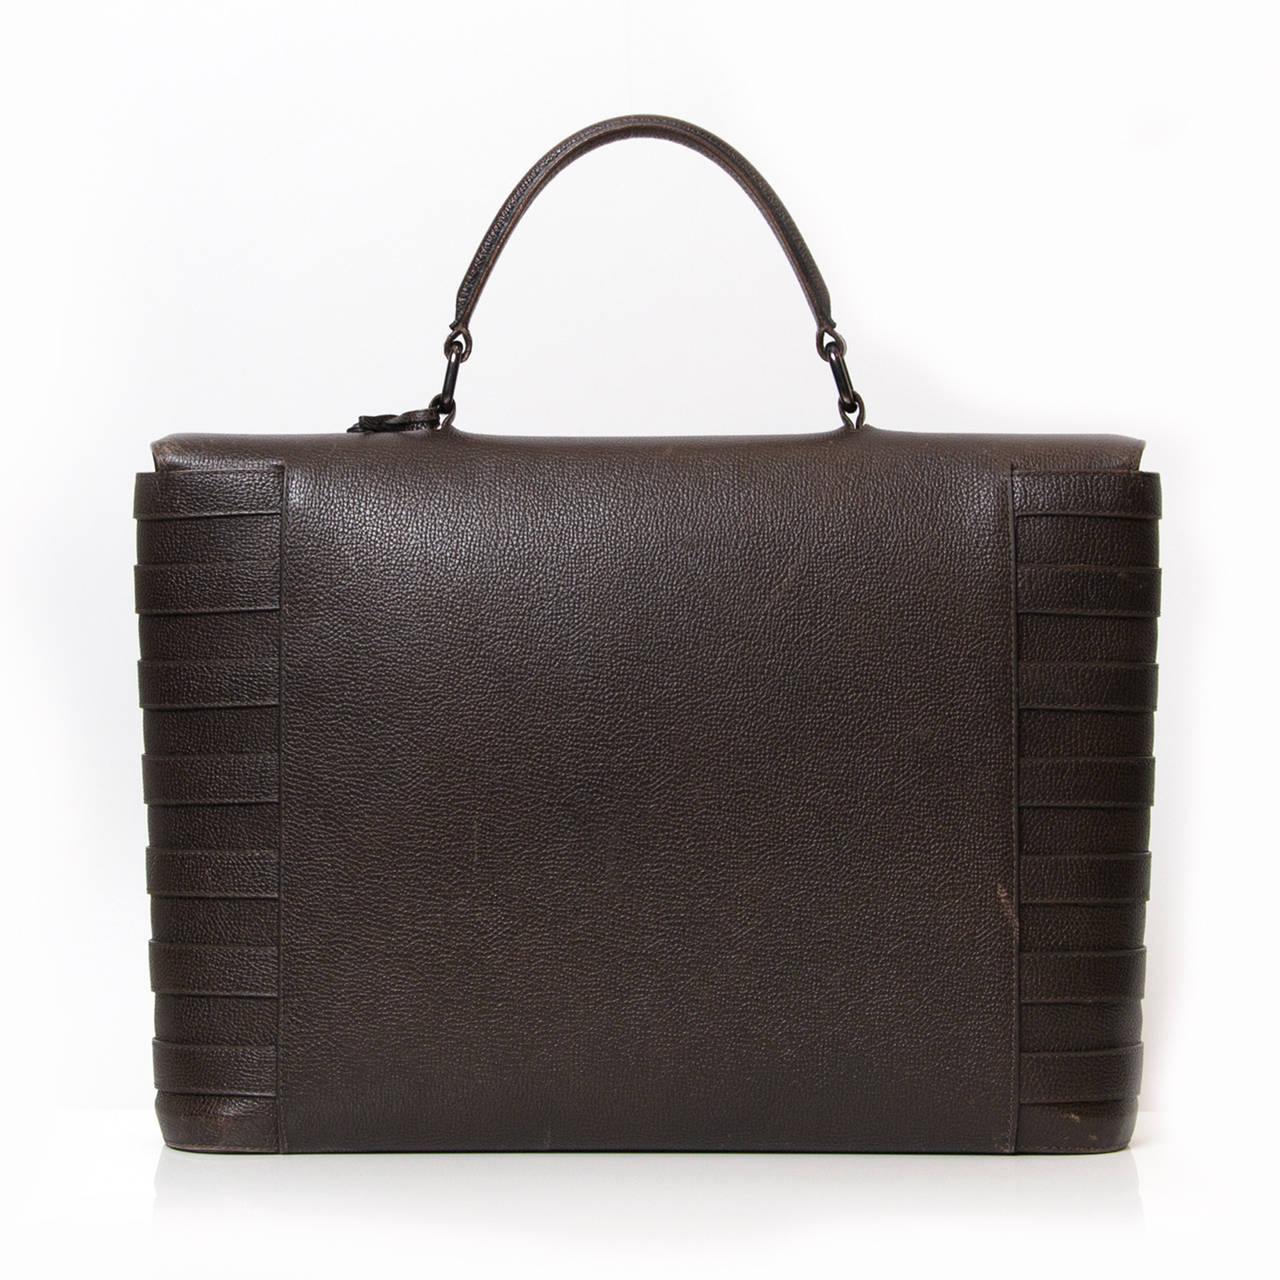 Delvaux Cèdre gm briefcase. 
Magnetic closure, suede interior linning.